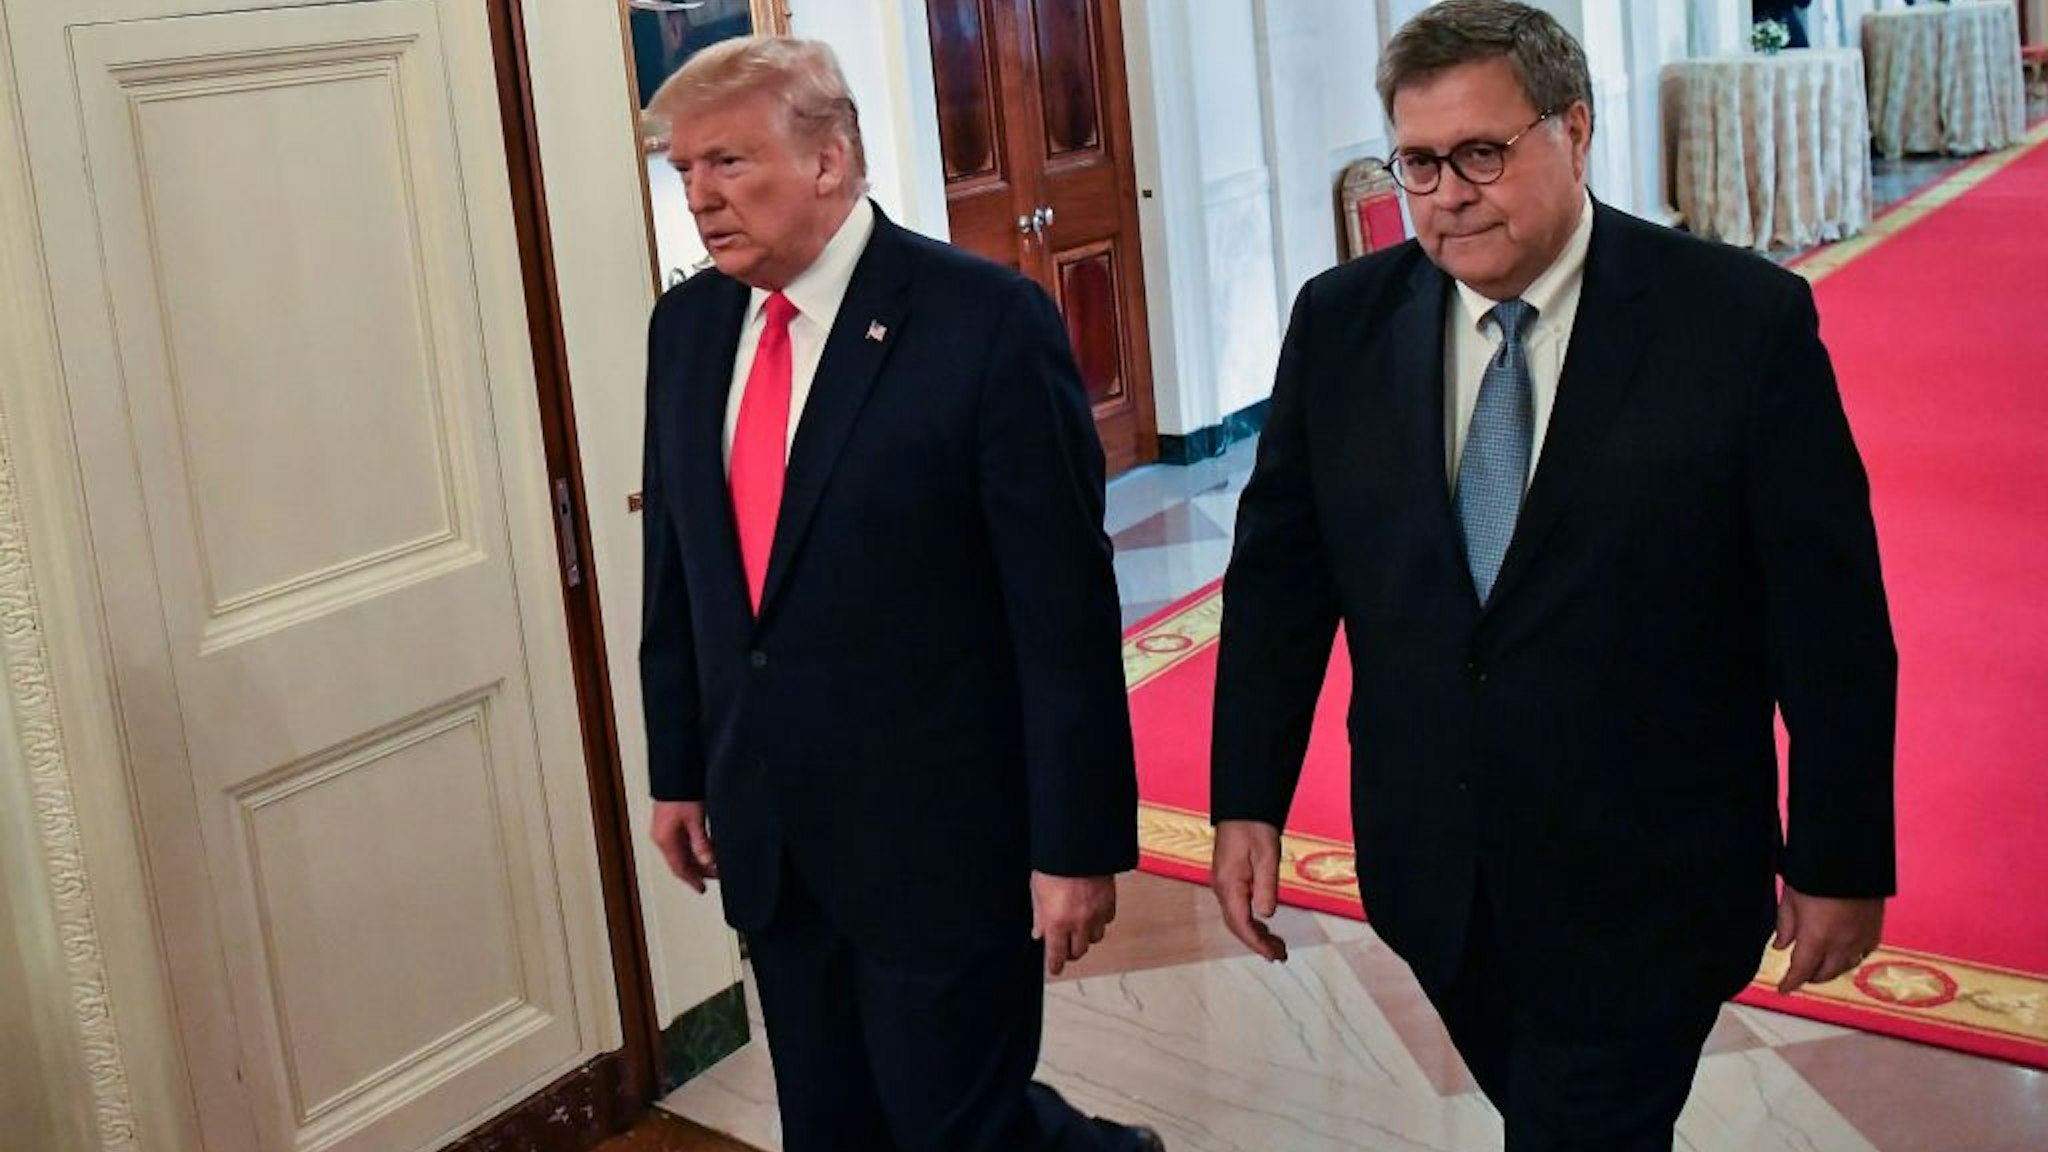 US President Donald Trump (L) and Attorney General William Barr arrive to present the Medal of Valor and Heroic Commendations